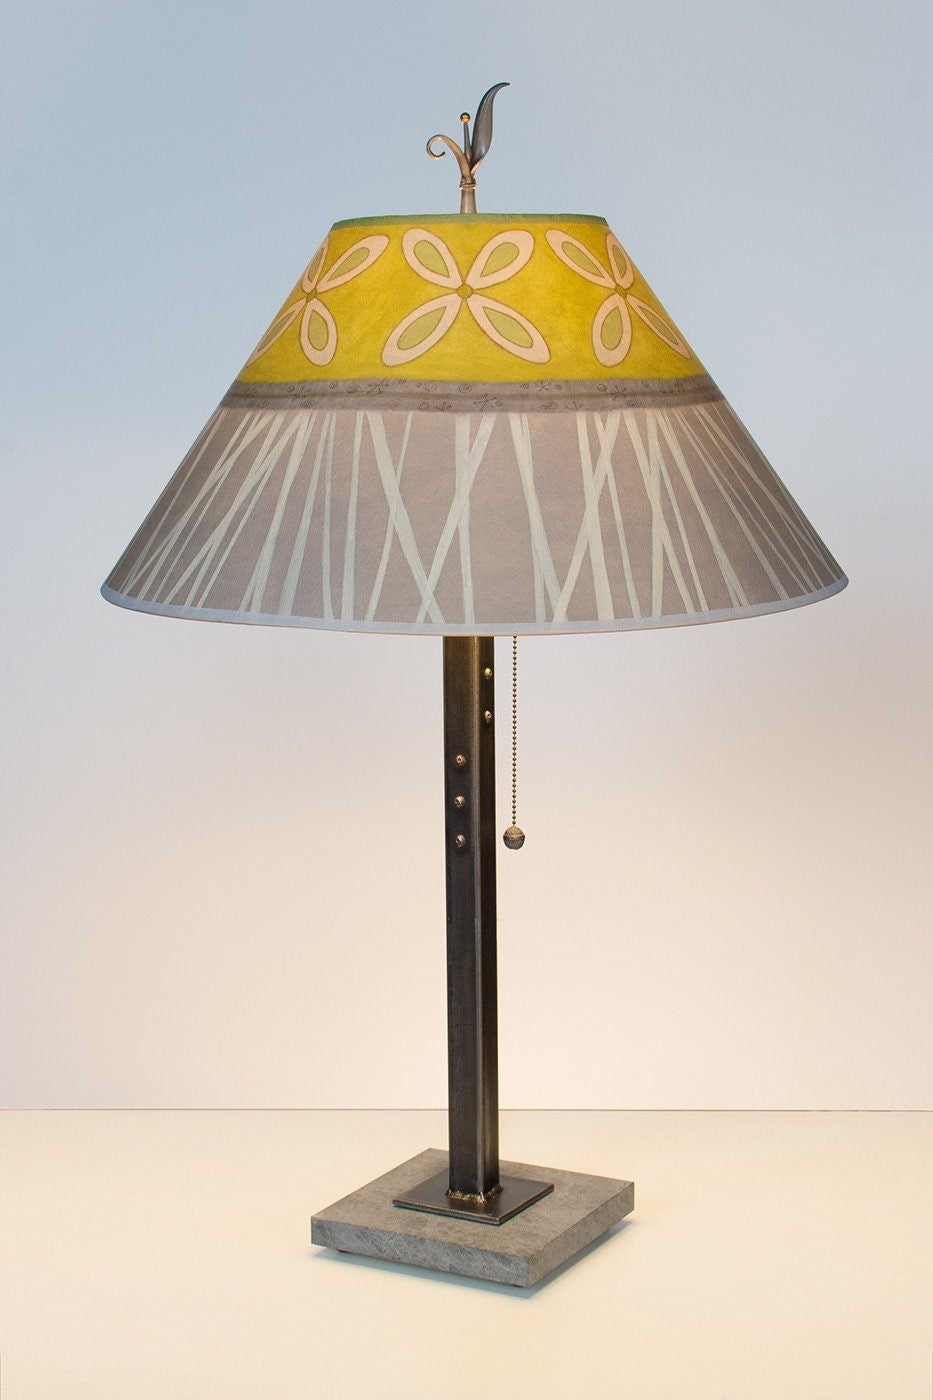 Janna Ugone &amp; Co Table Lamps Steel Table Lamp with Large Conical Shade in Kiwi